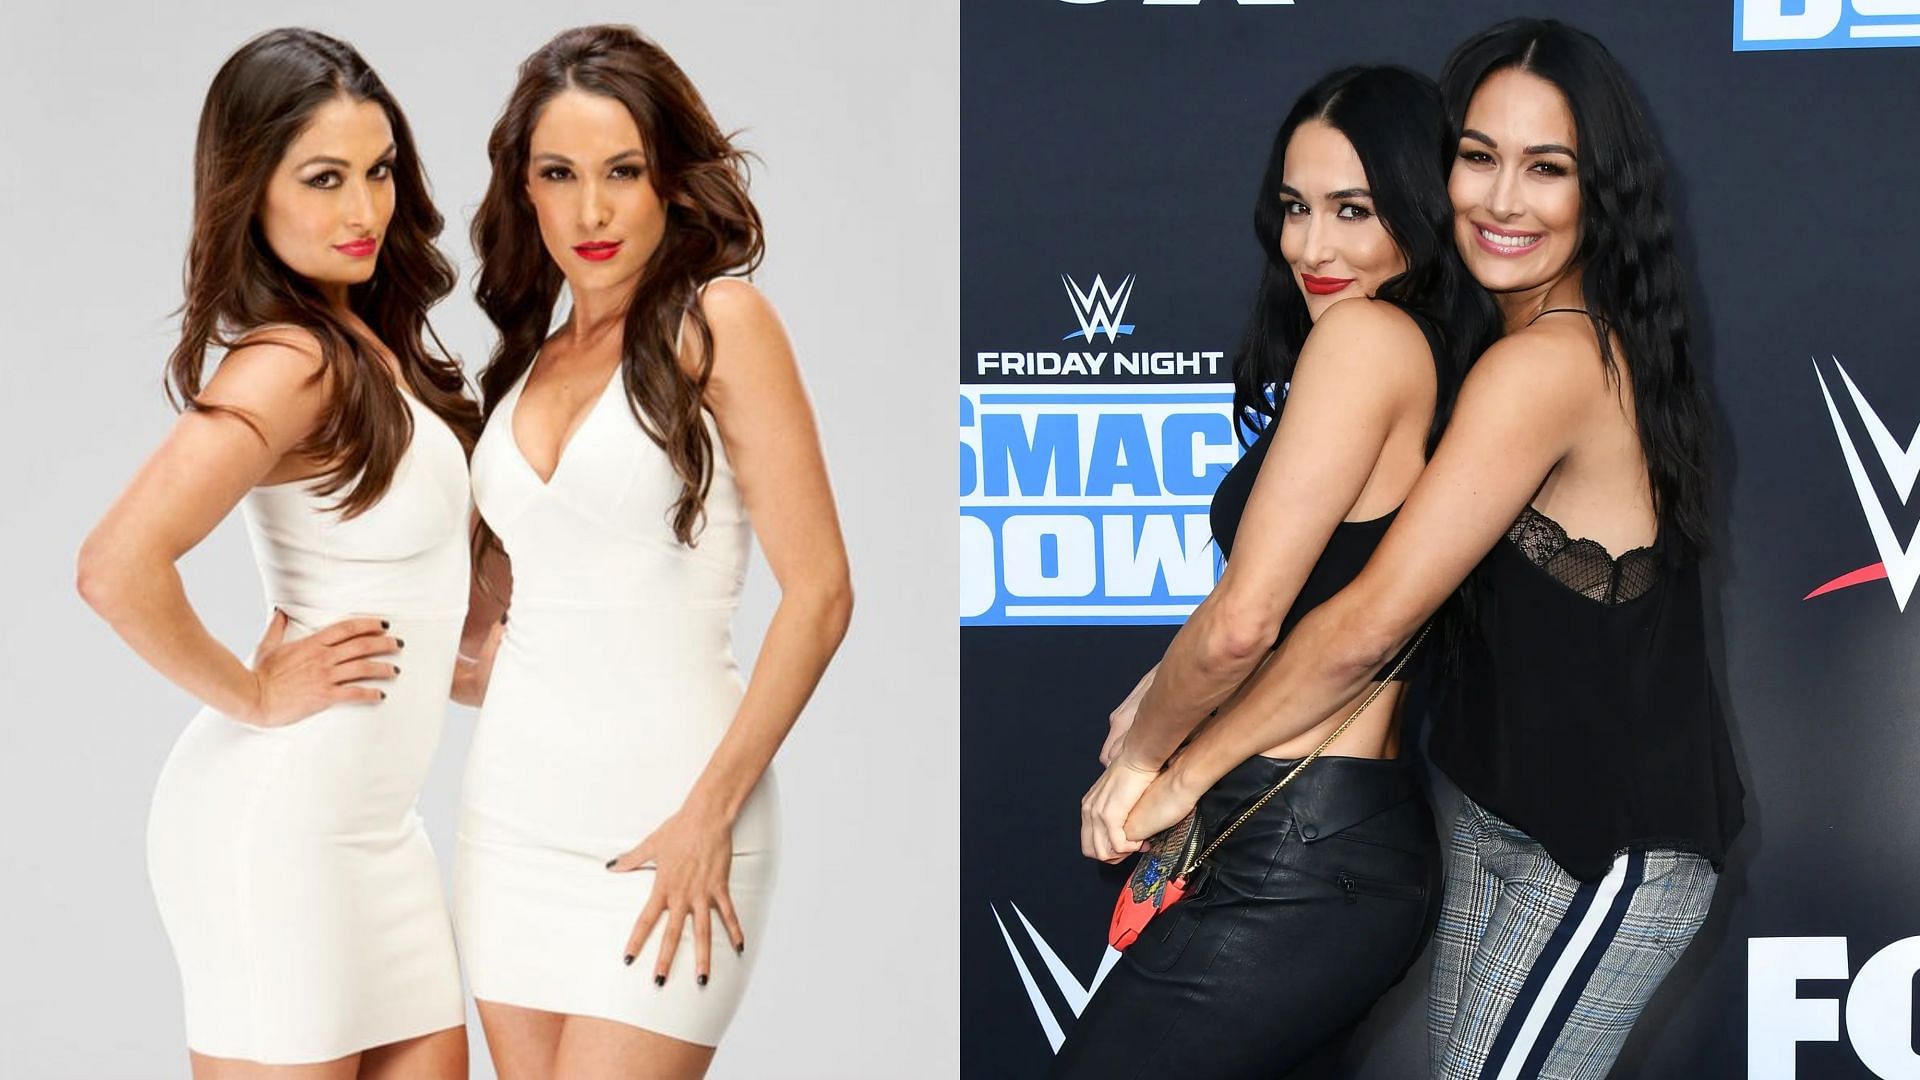 Nikki and Brie Bella leaving WWE, announce name change